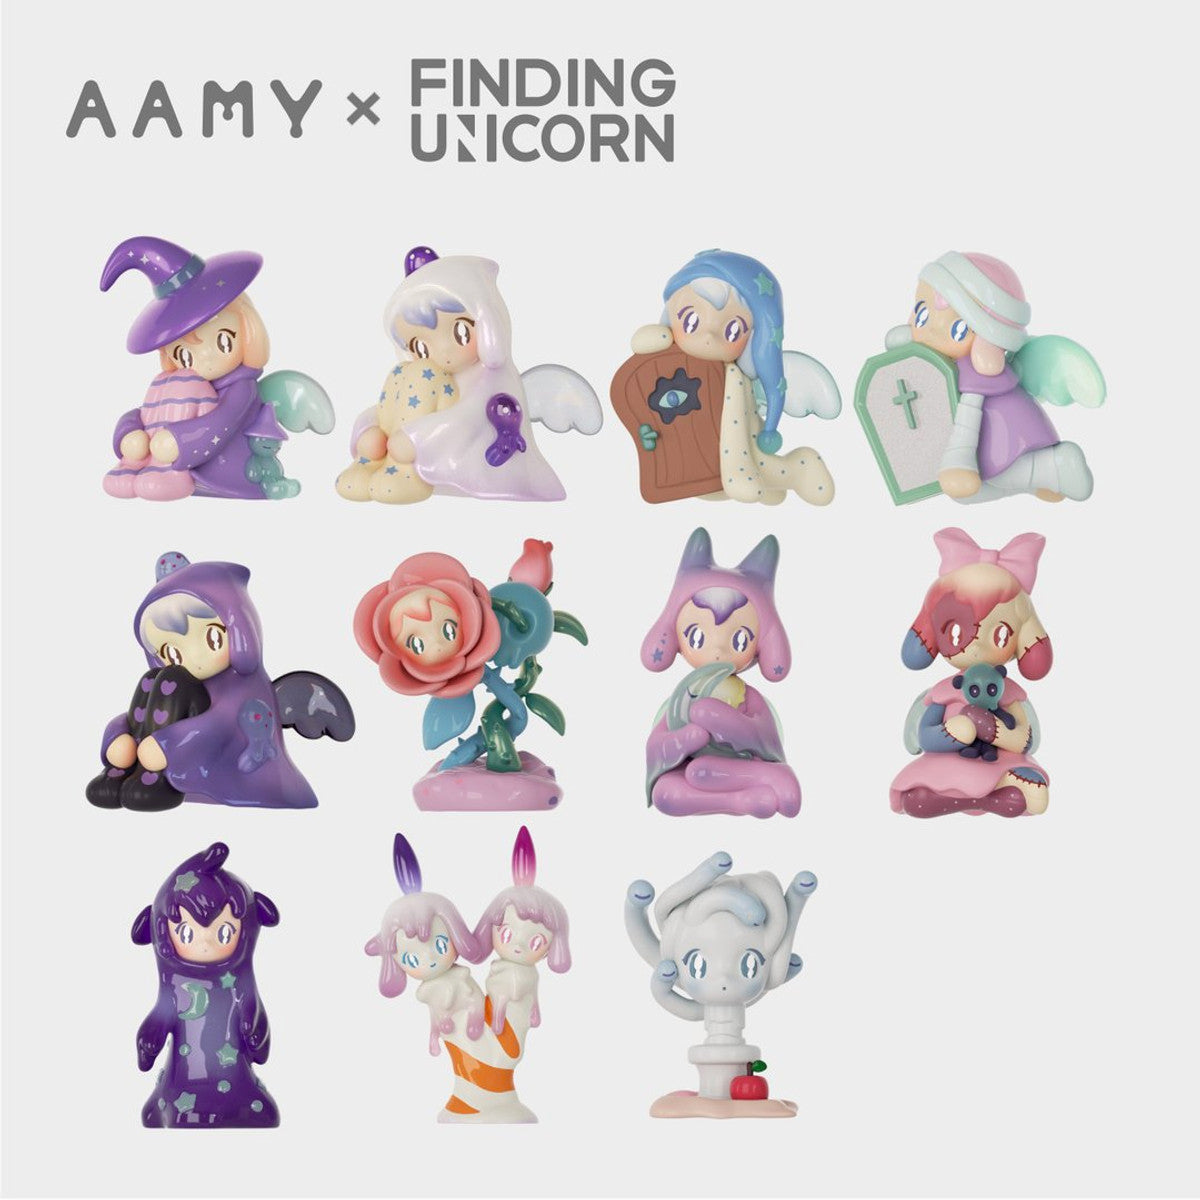 F.U.N. AAMY The Magician's Story
Blind Box by AAMY